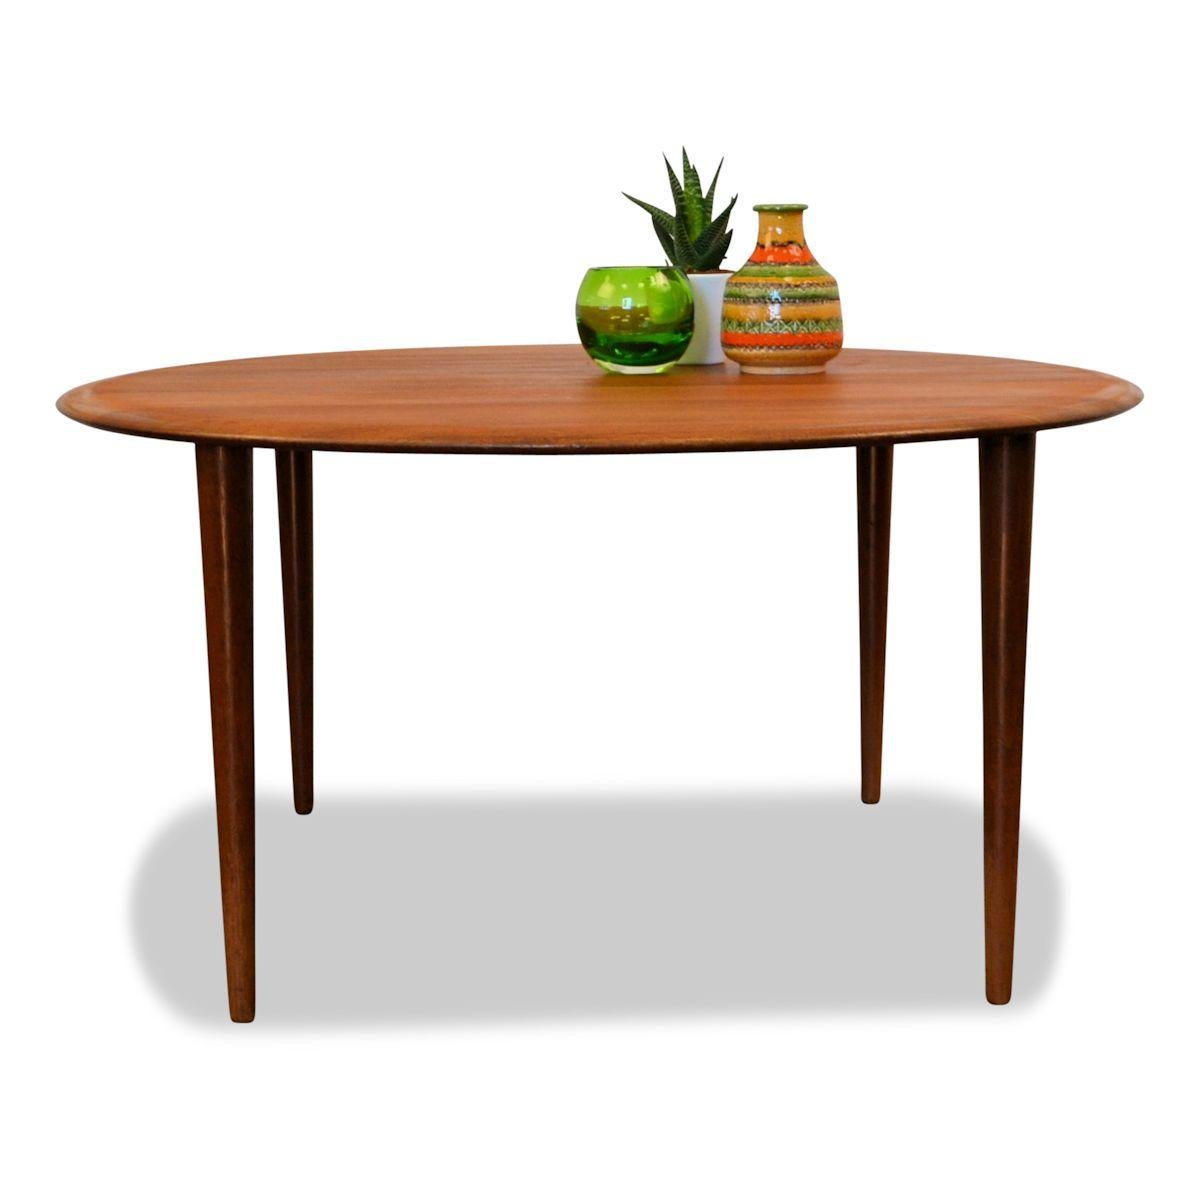 Danish Modern teak coffee table designed by top designer duo Peter Hvidt & Orla Mølgaard-Nielsen for France & Son. Works of the duo are represented at the MOMA in New York, the National Gallery in Melbourne and the Danish Museum of Art & Design in